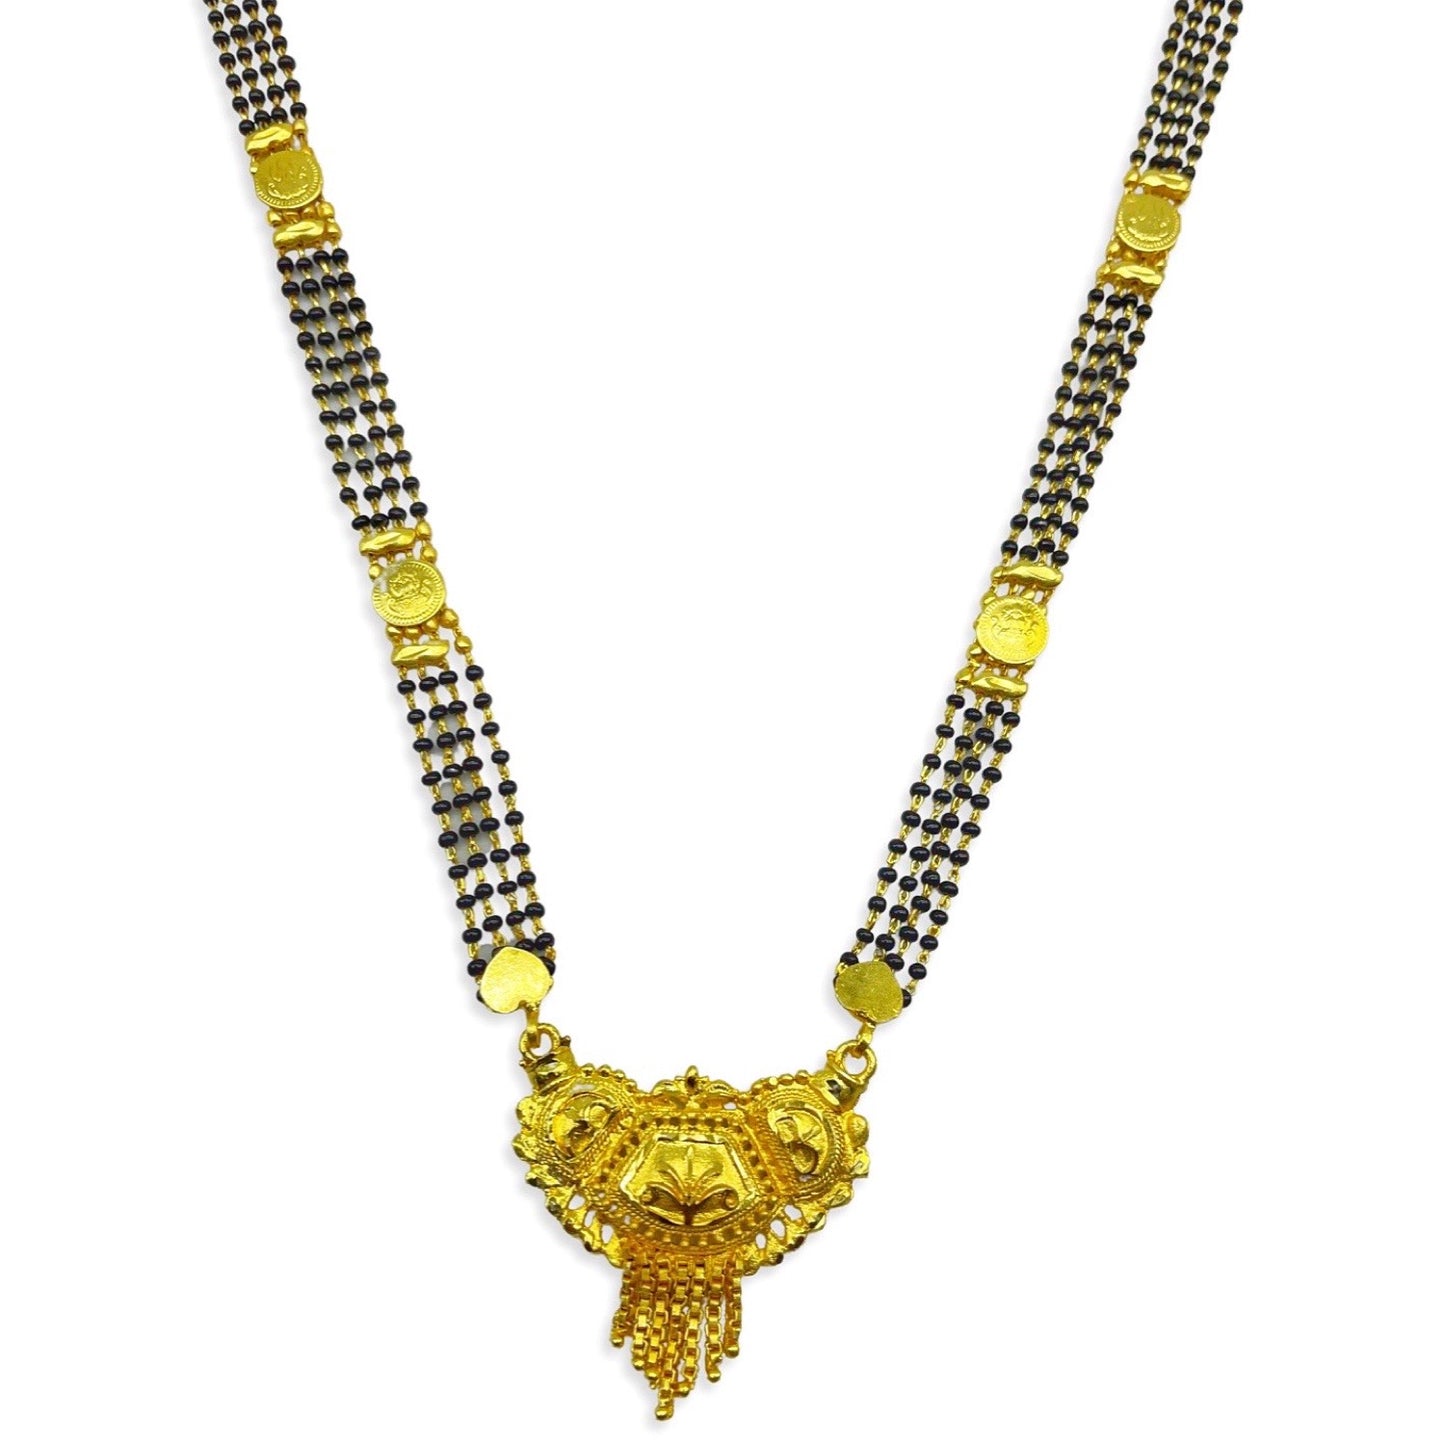 Long Mangalsutra Designs Gold Plated Latest Pendant 2 Layer Traditional Black Beads Mangalsutra